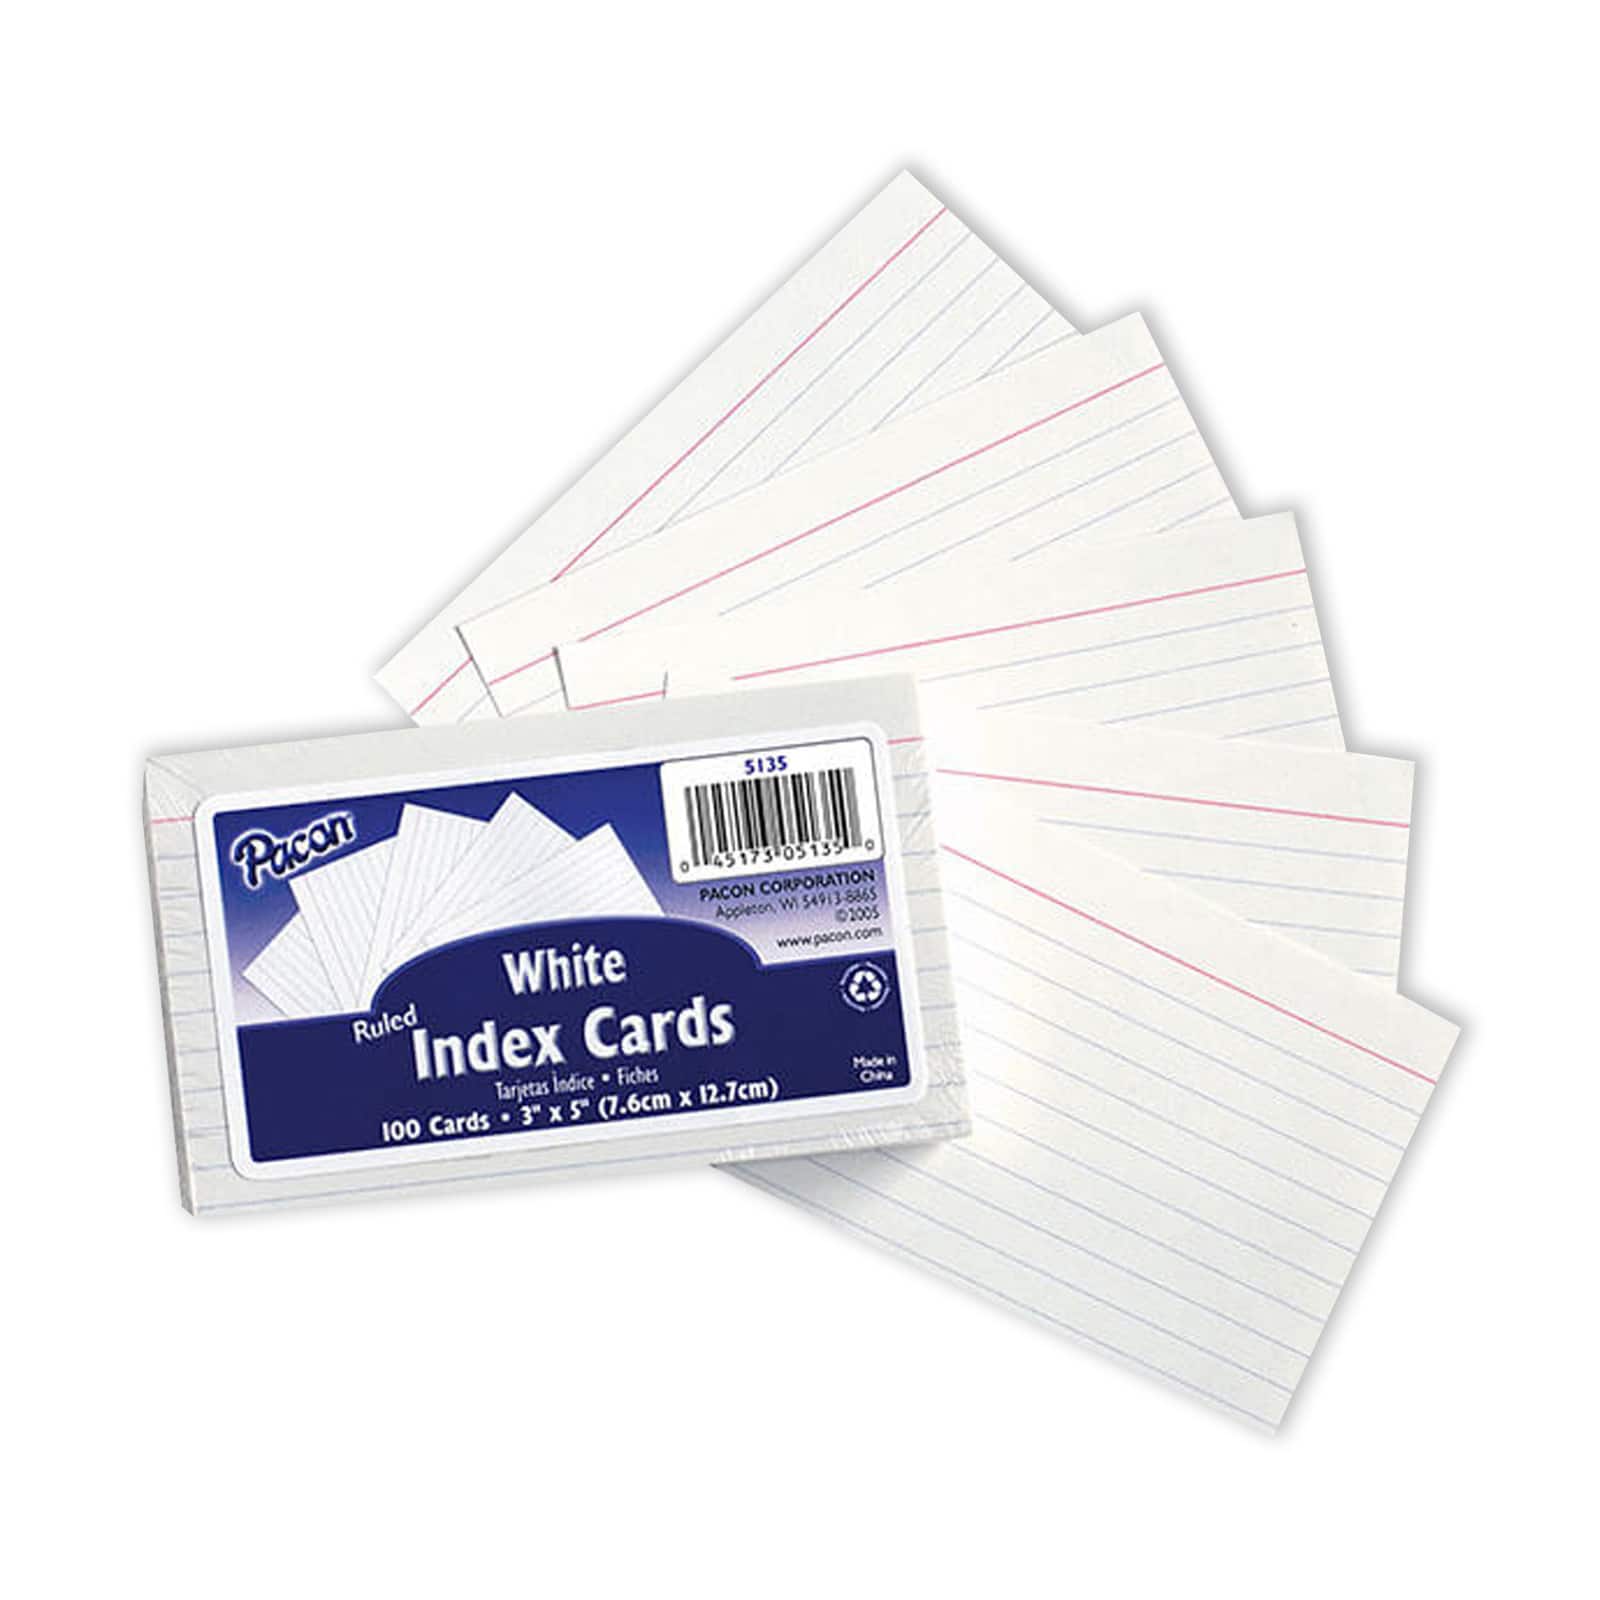 how to print on 3x5 index cards open office